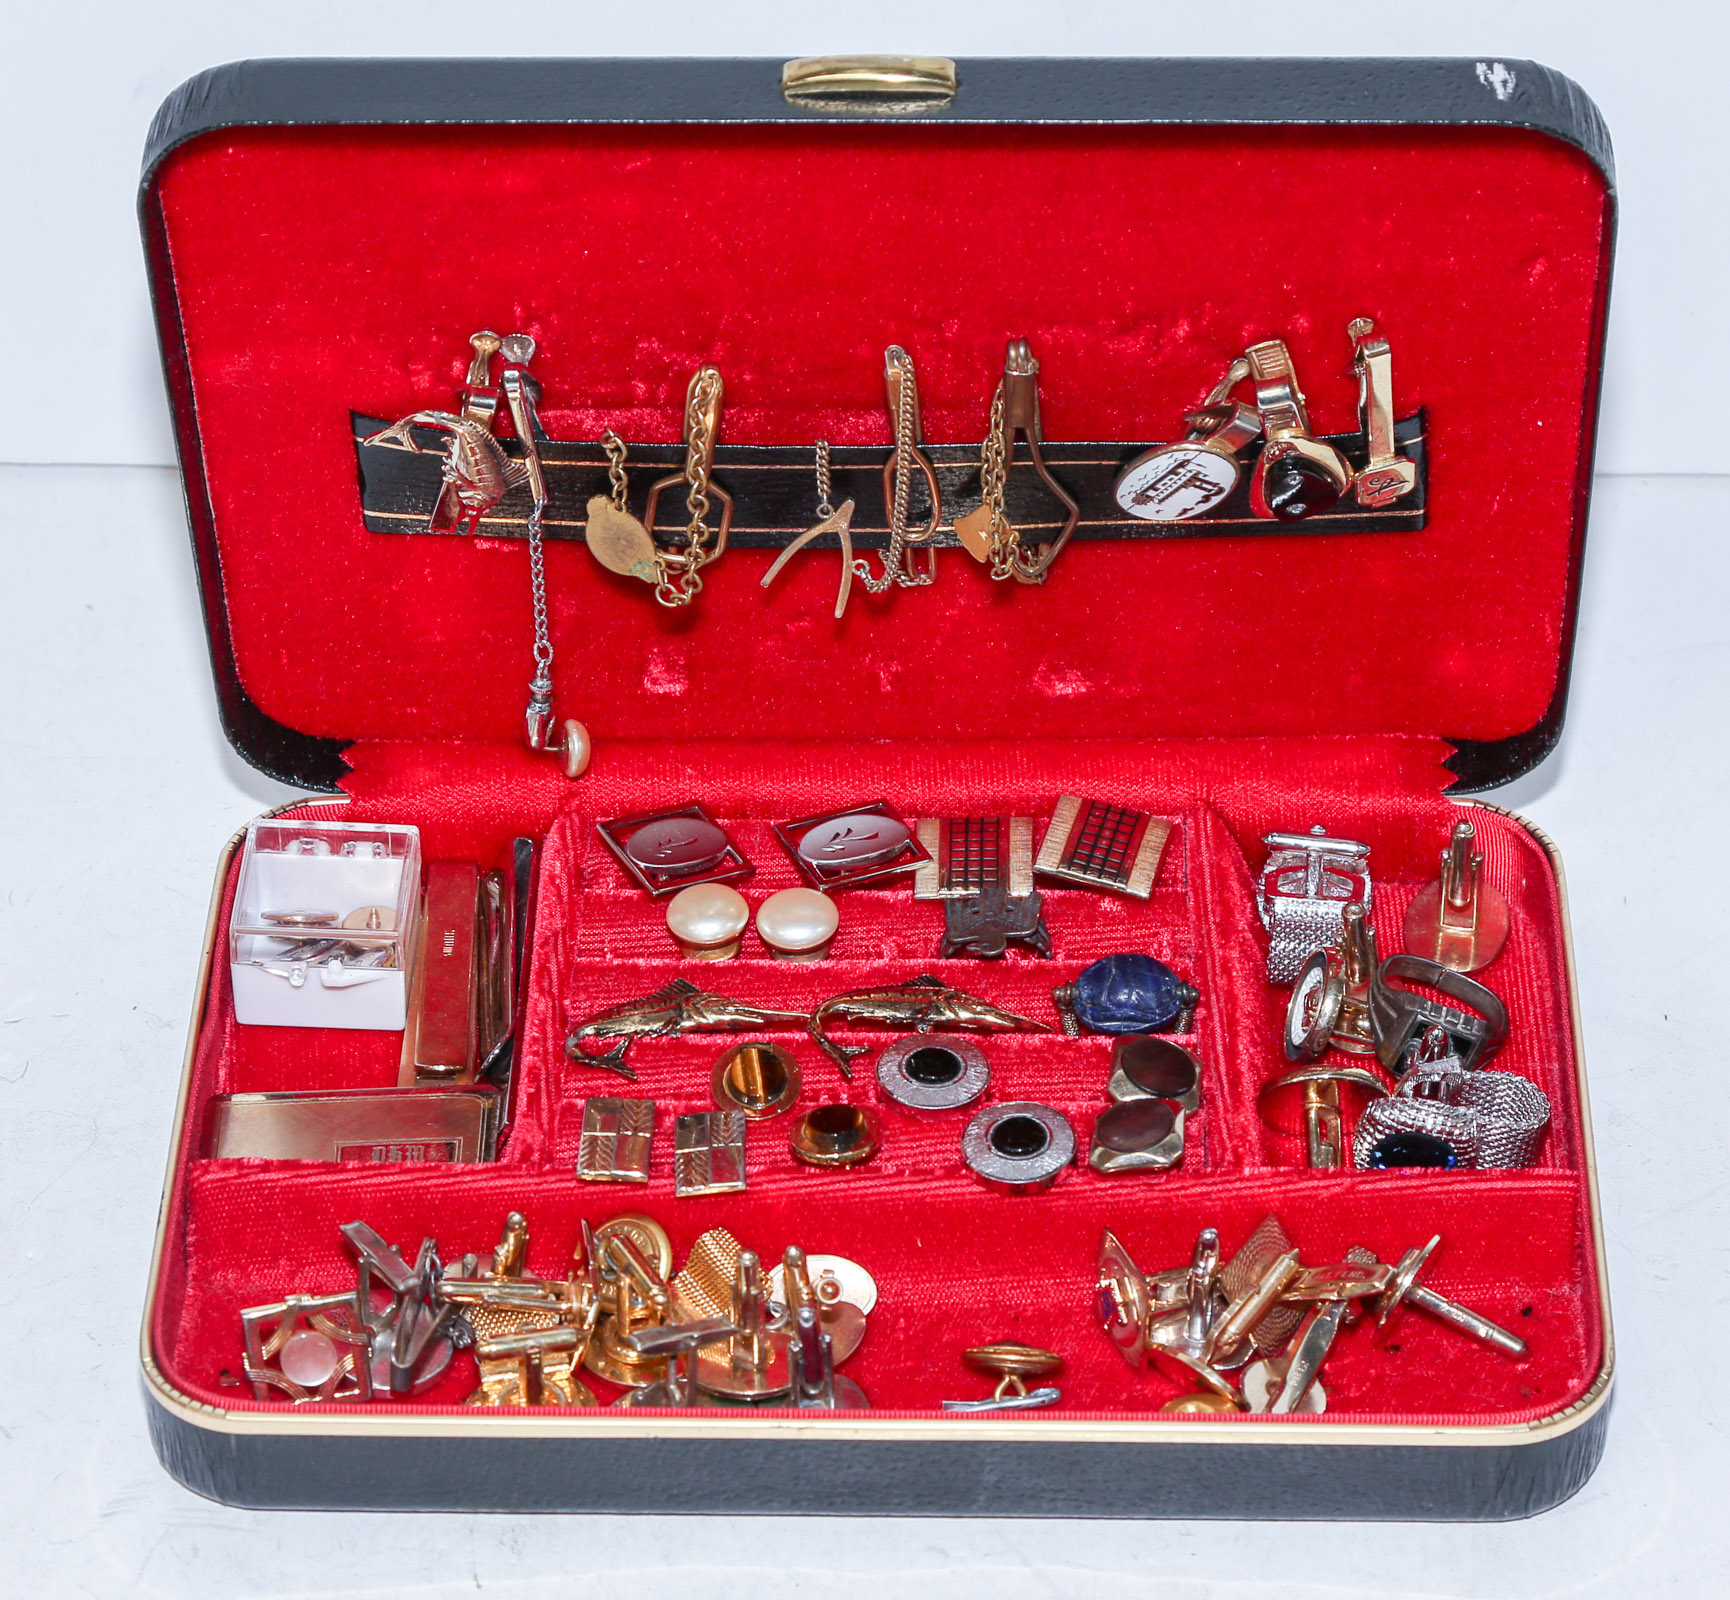 A JEWELRY BOX FILLED WITH CUFFLINKS 369c10